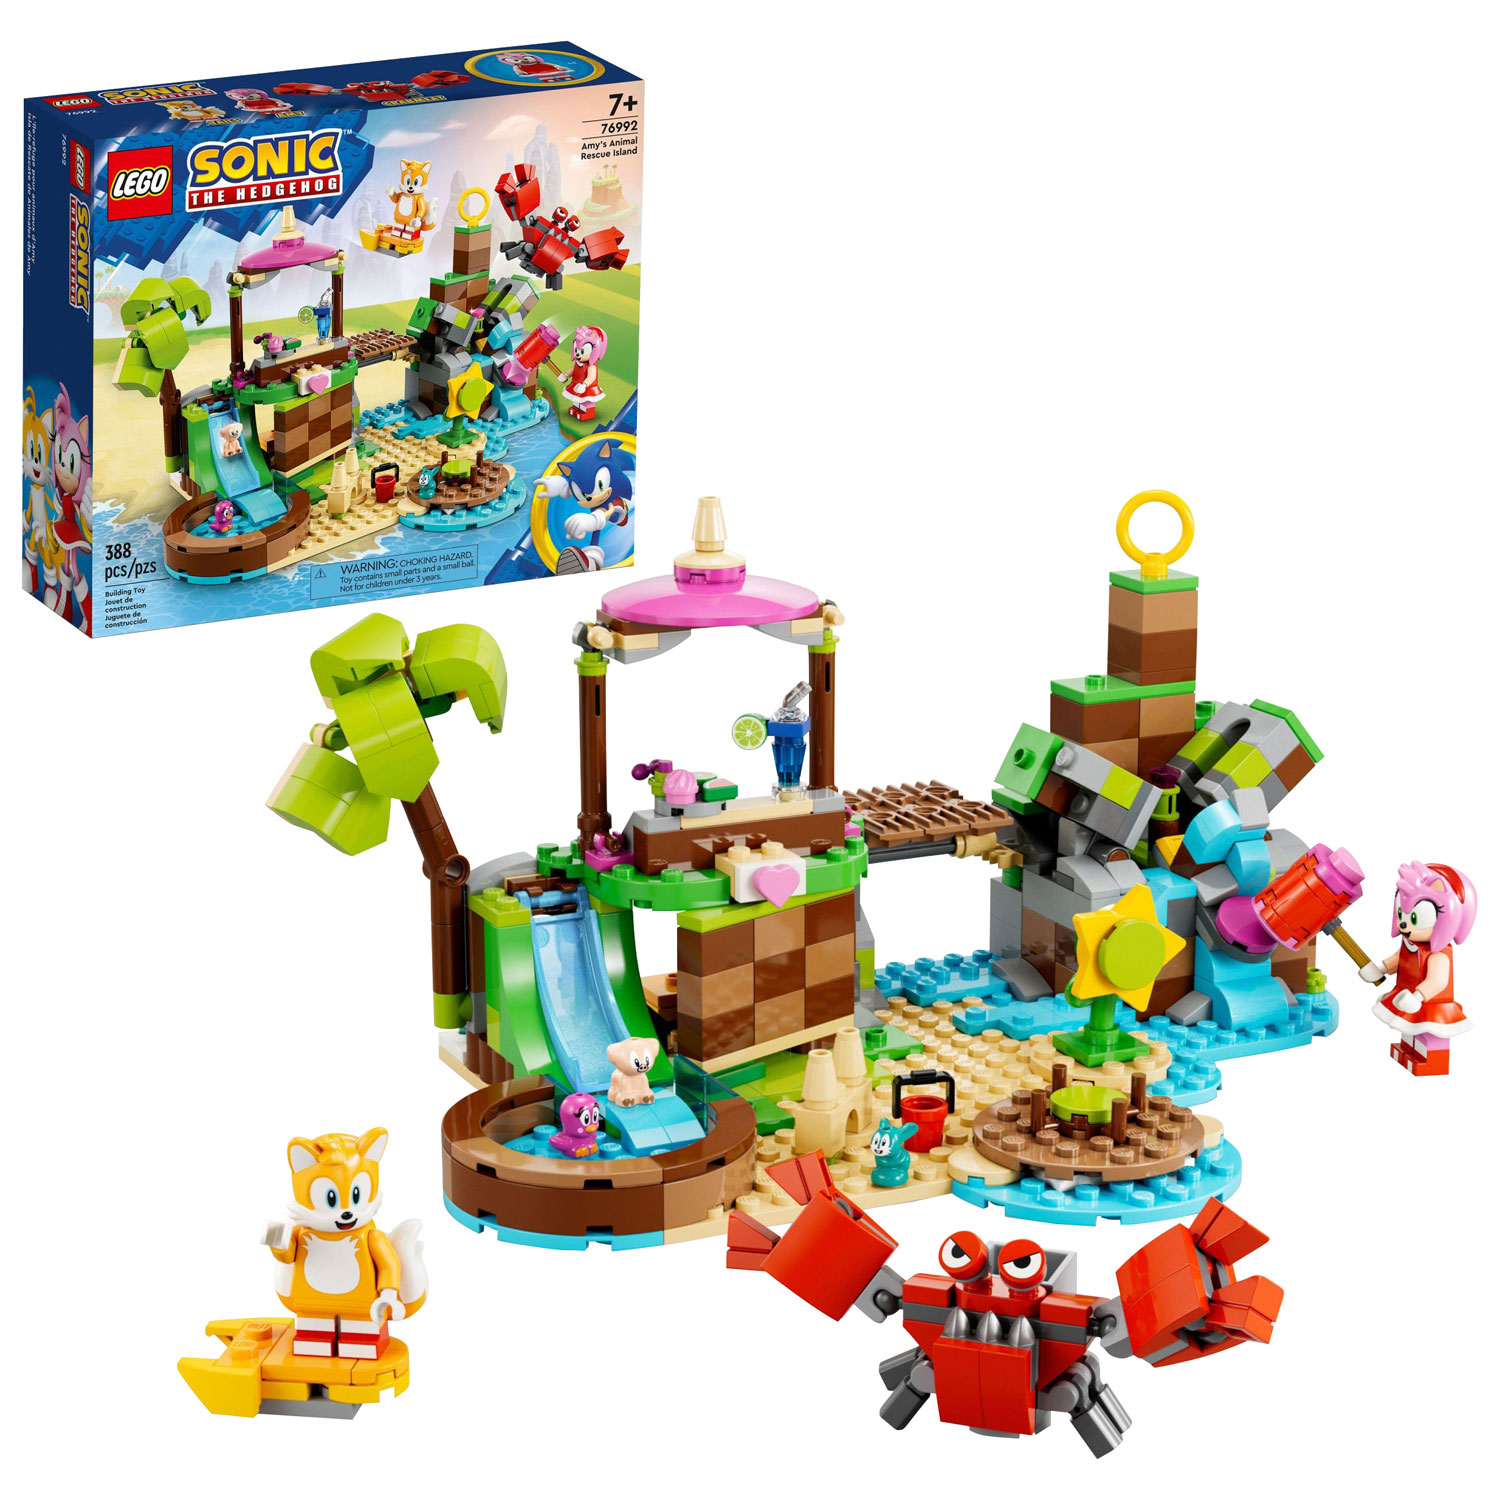 LEGO Sonic the Hedgehog: Amy’s Animal Rescue Island - 388 Pieces (76992)